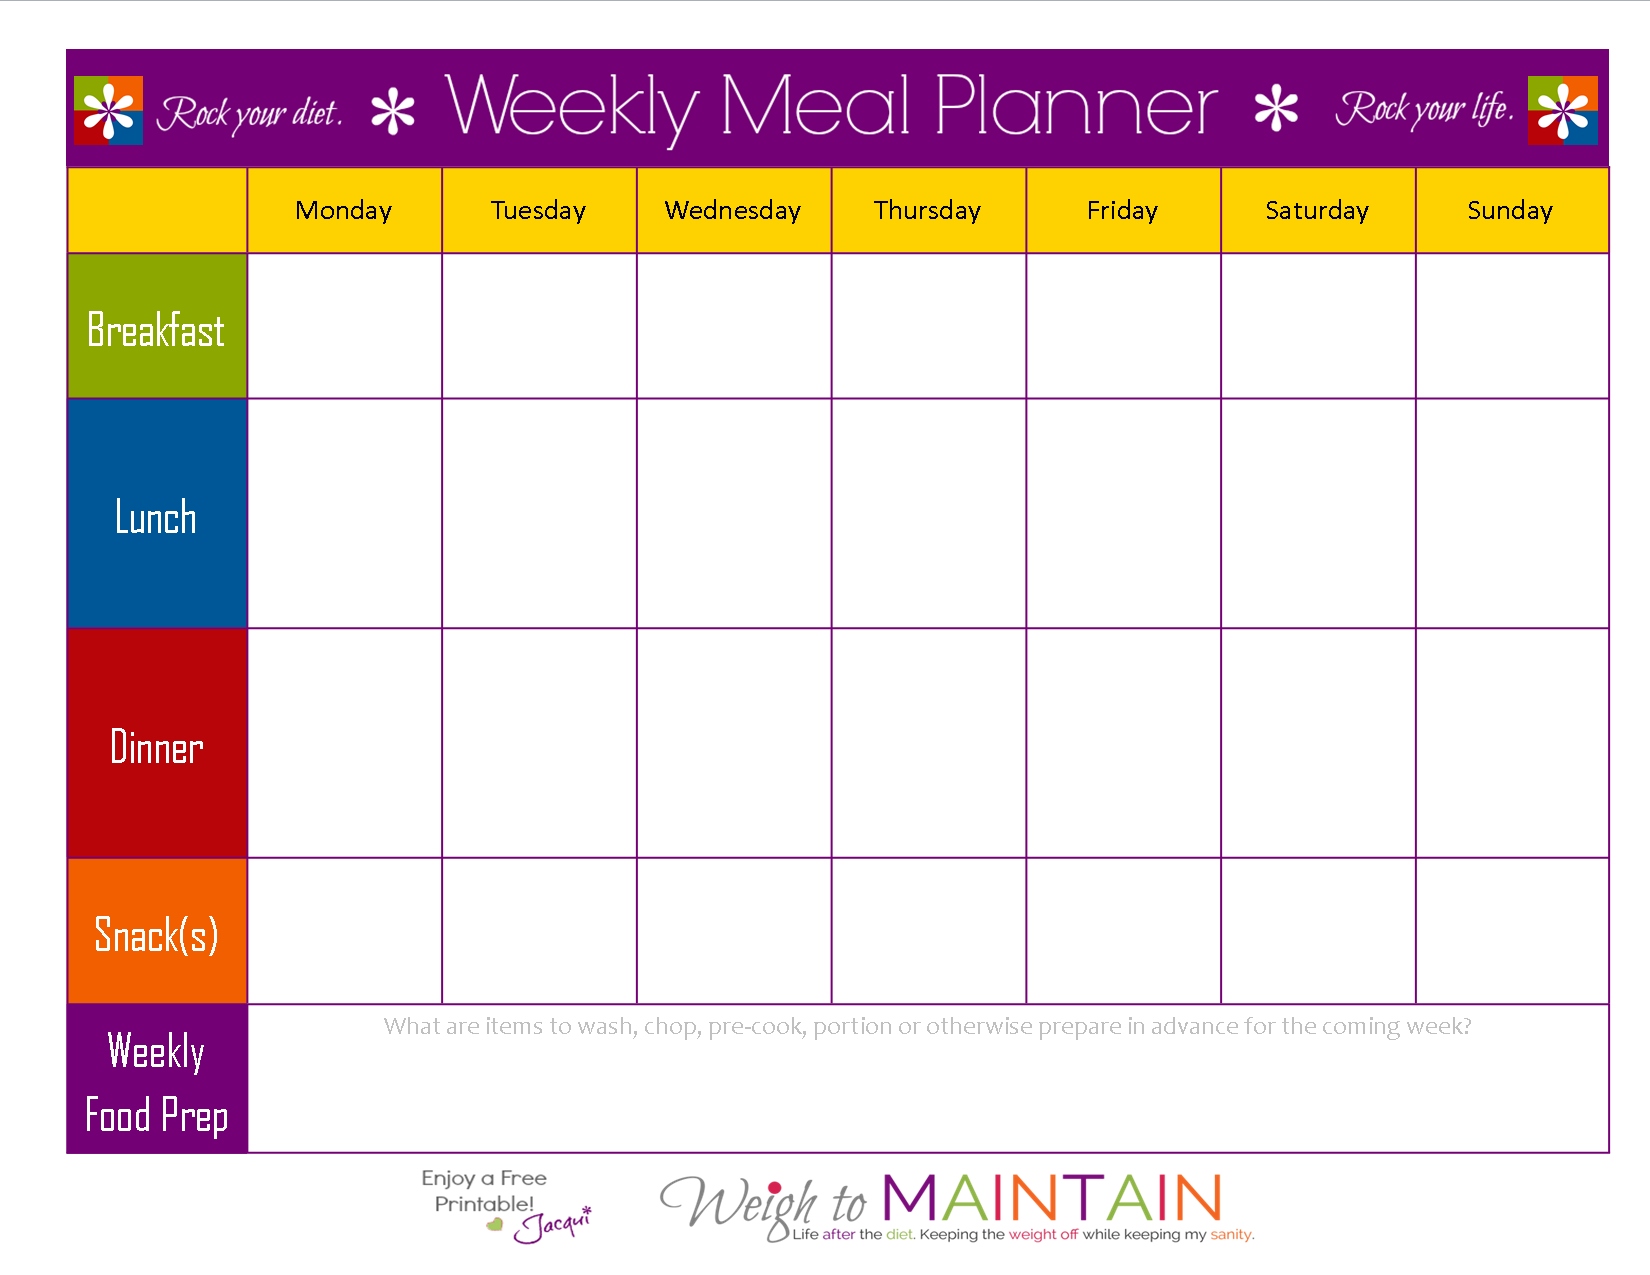 8 Best Images of 21Day Fix Meal Plan Printable 21Day Fix Printables